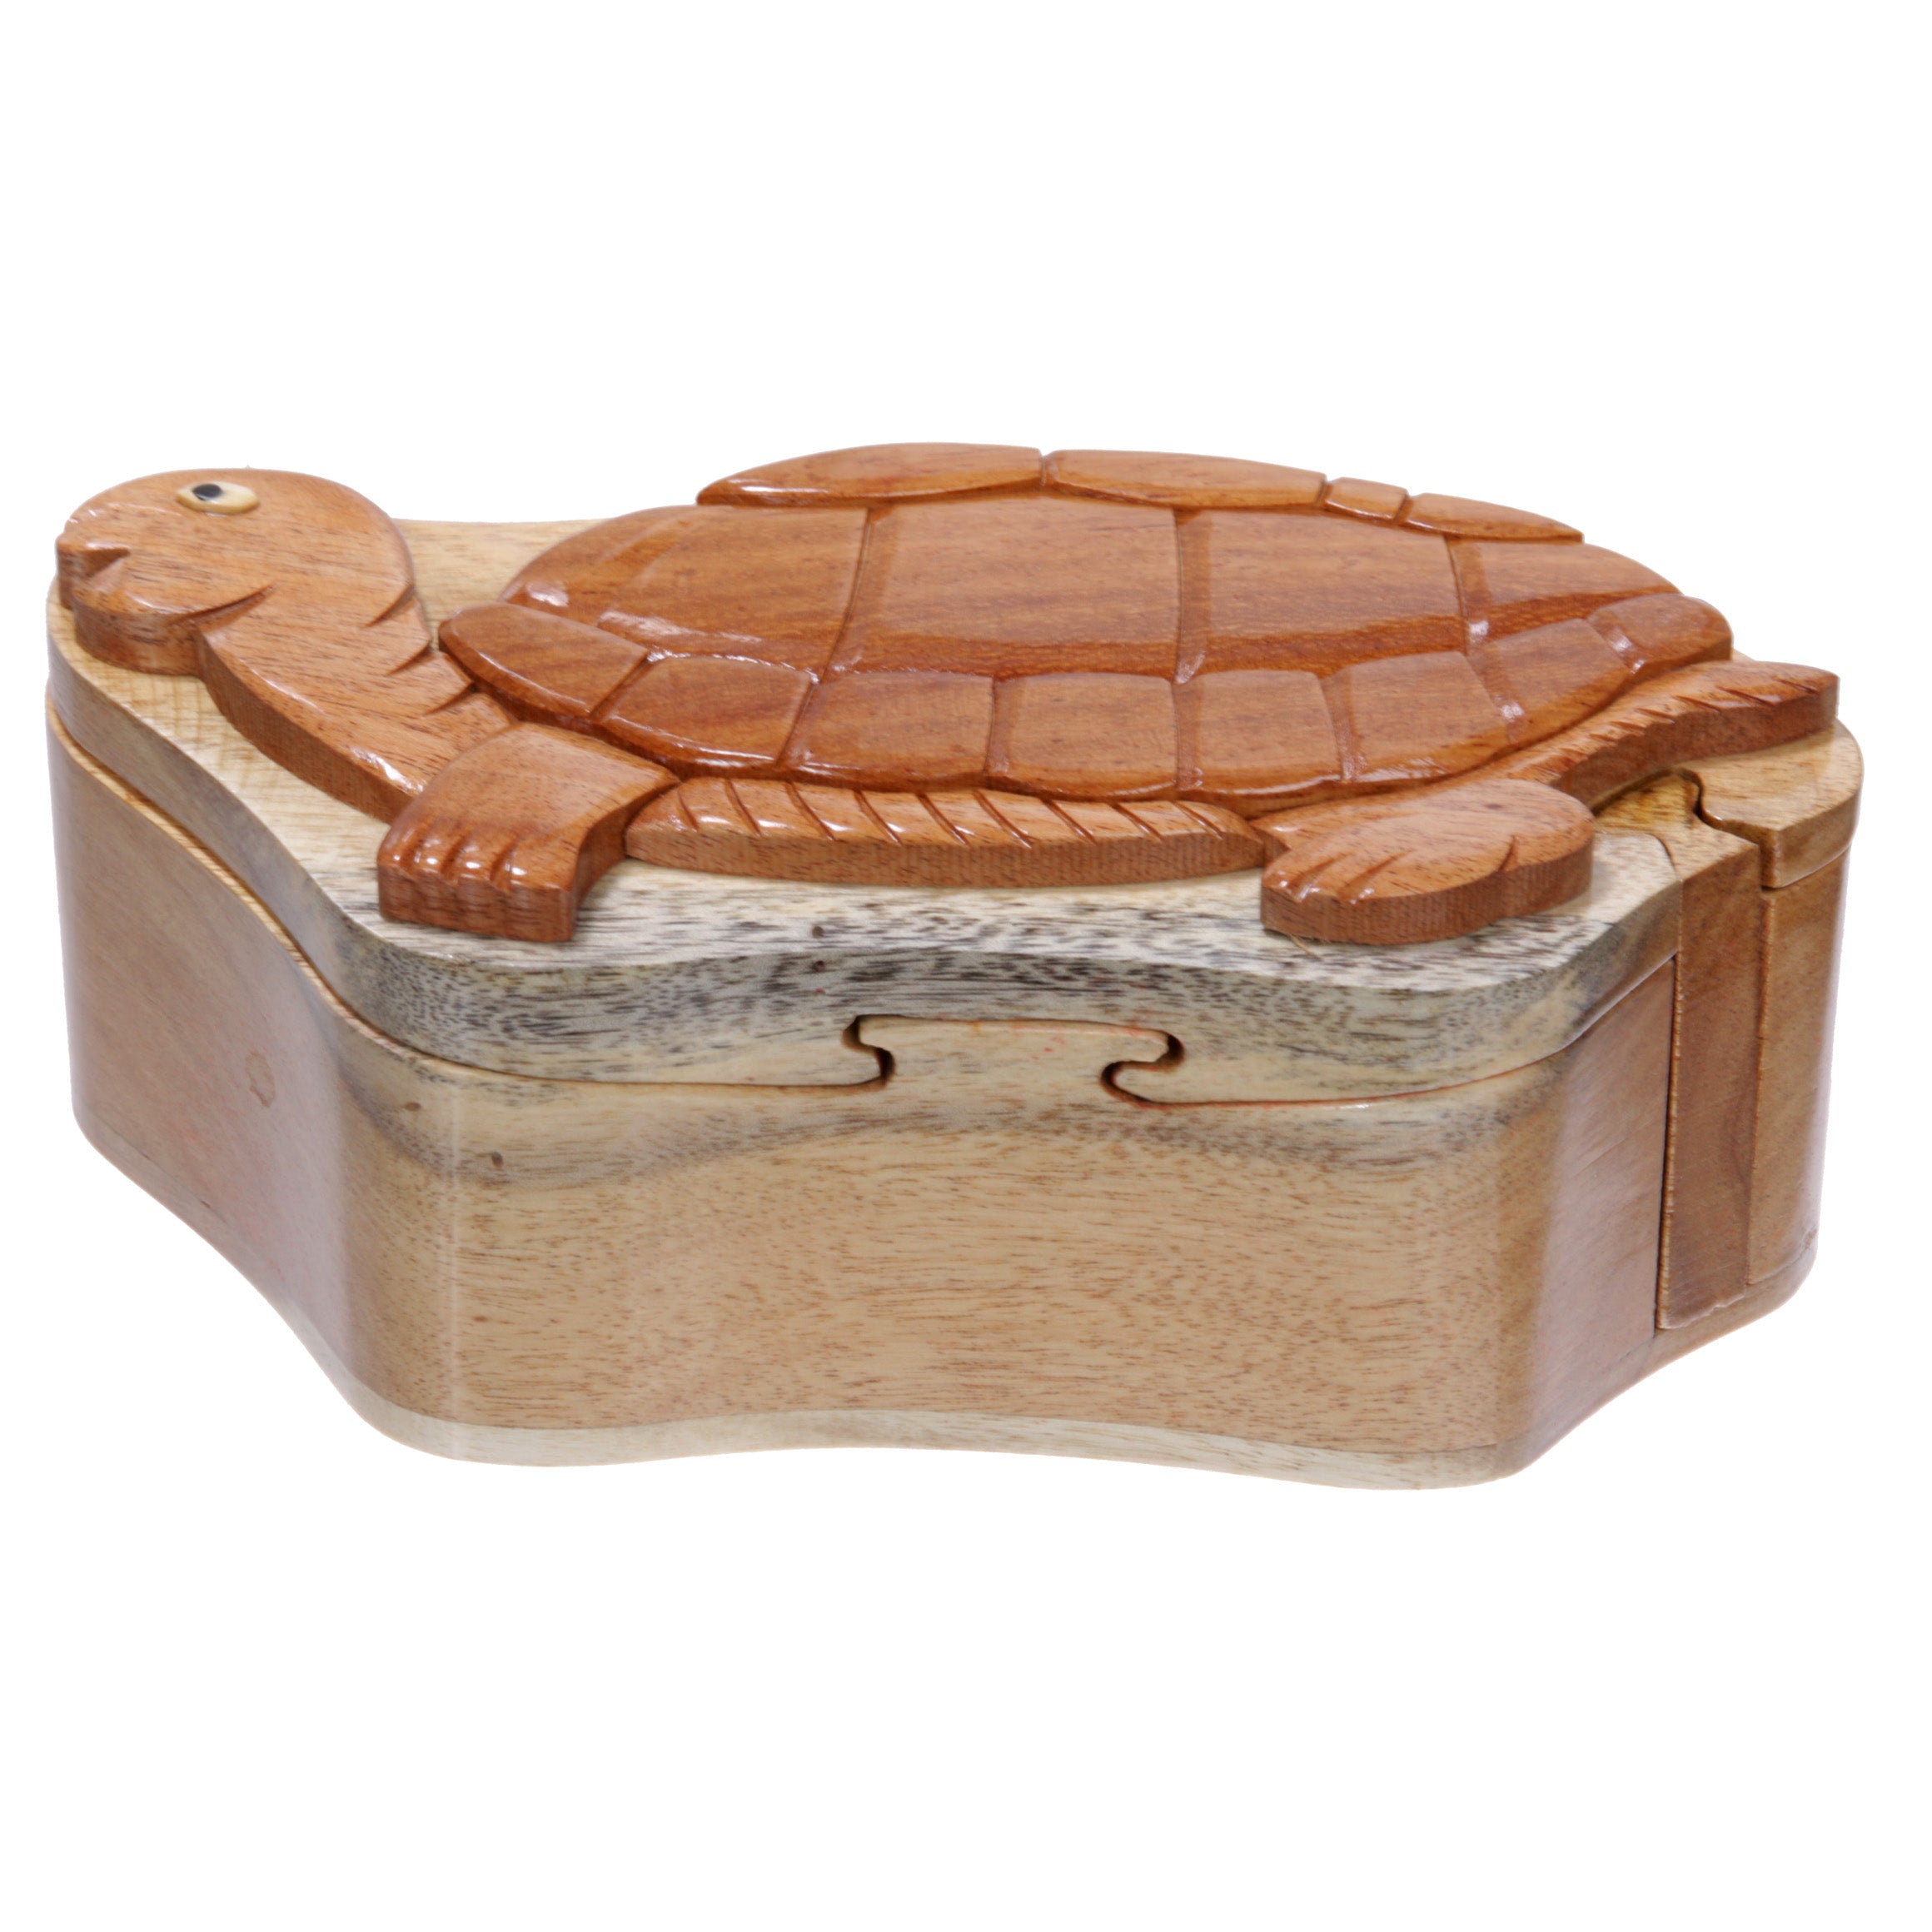 Handcrafted Wooden Animal Shape Secret Jewelry Puzzle Box - Turtle (620)